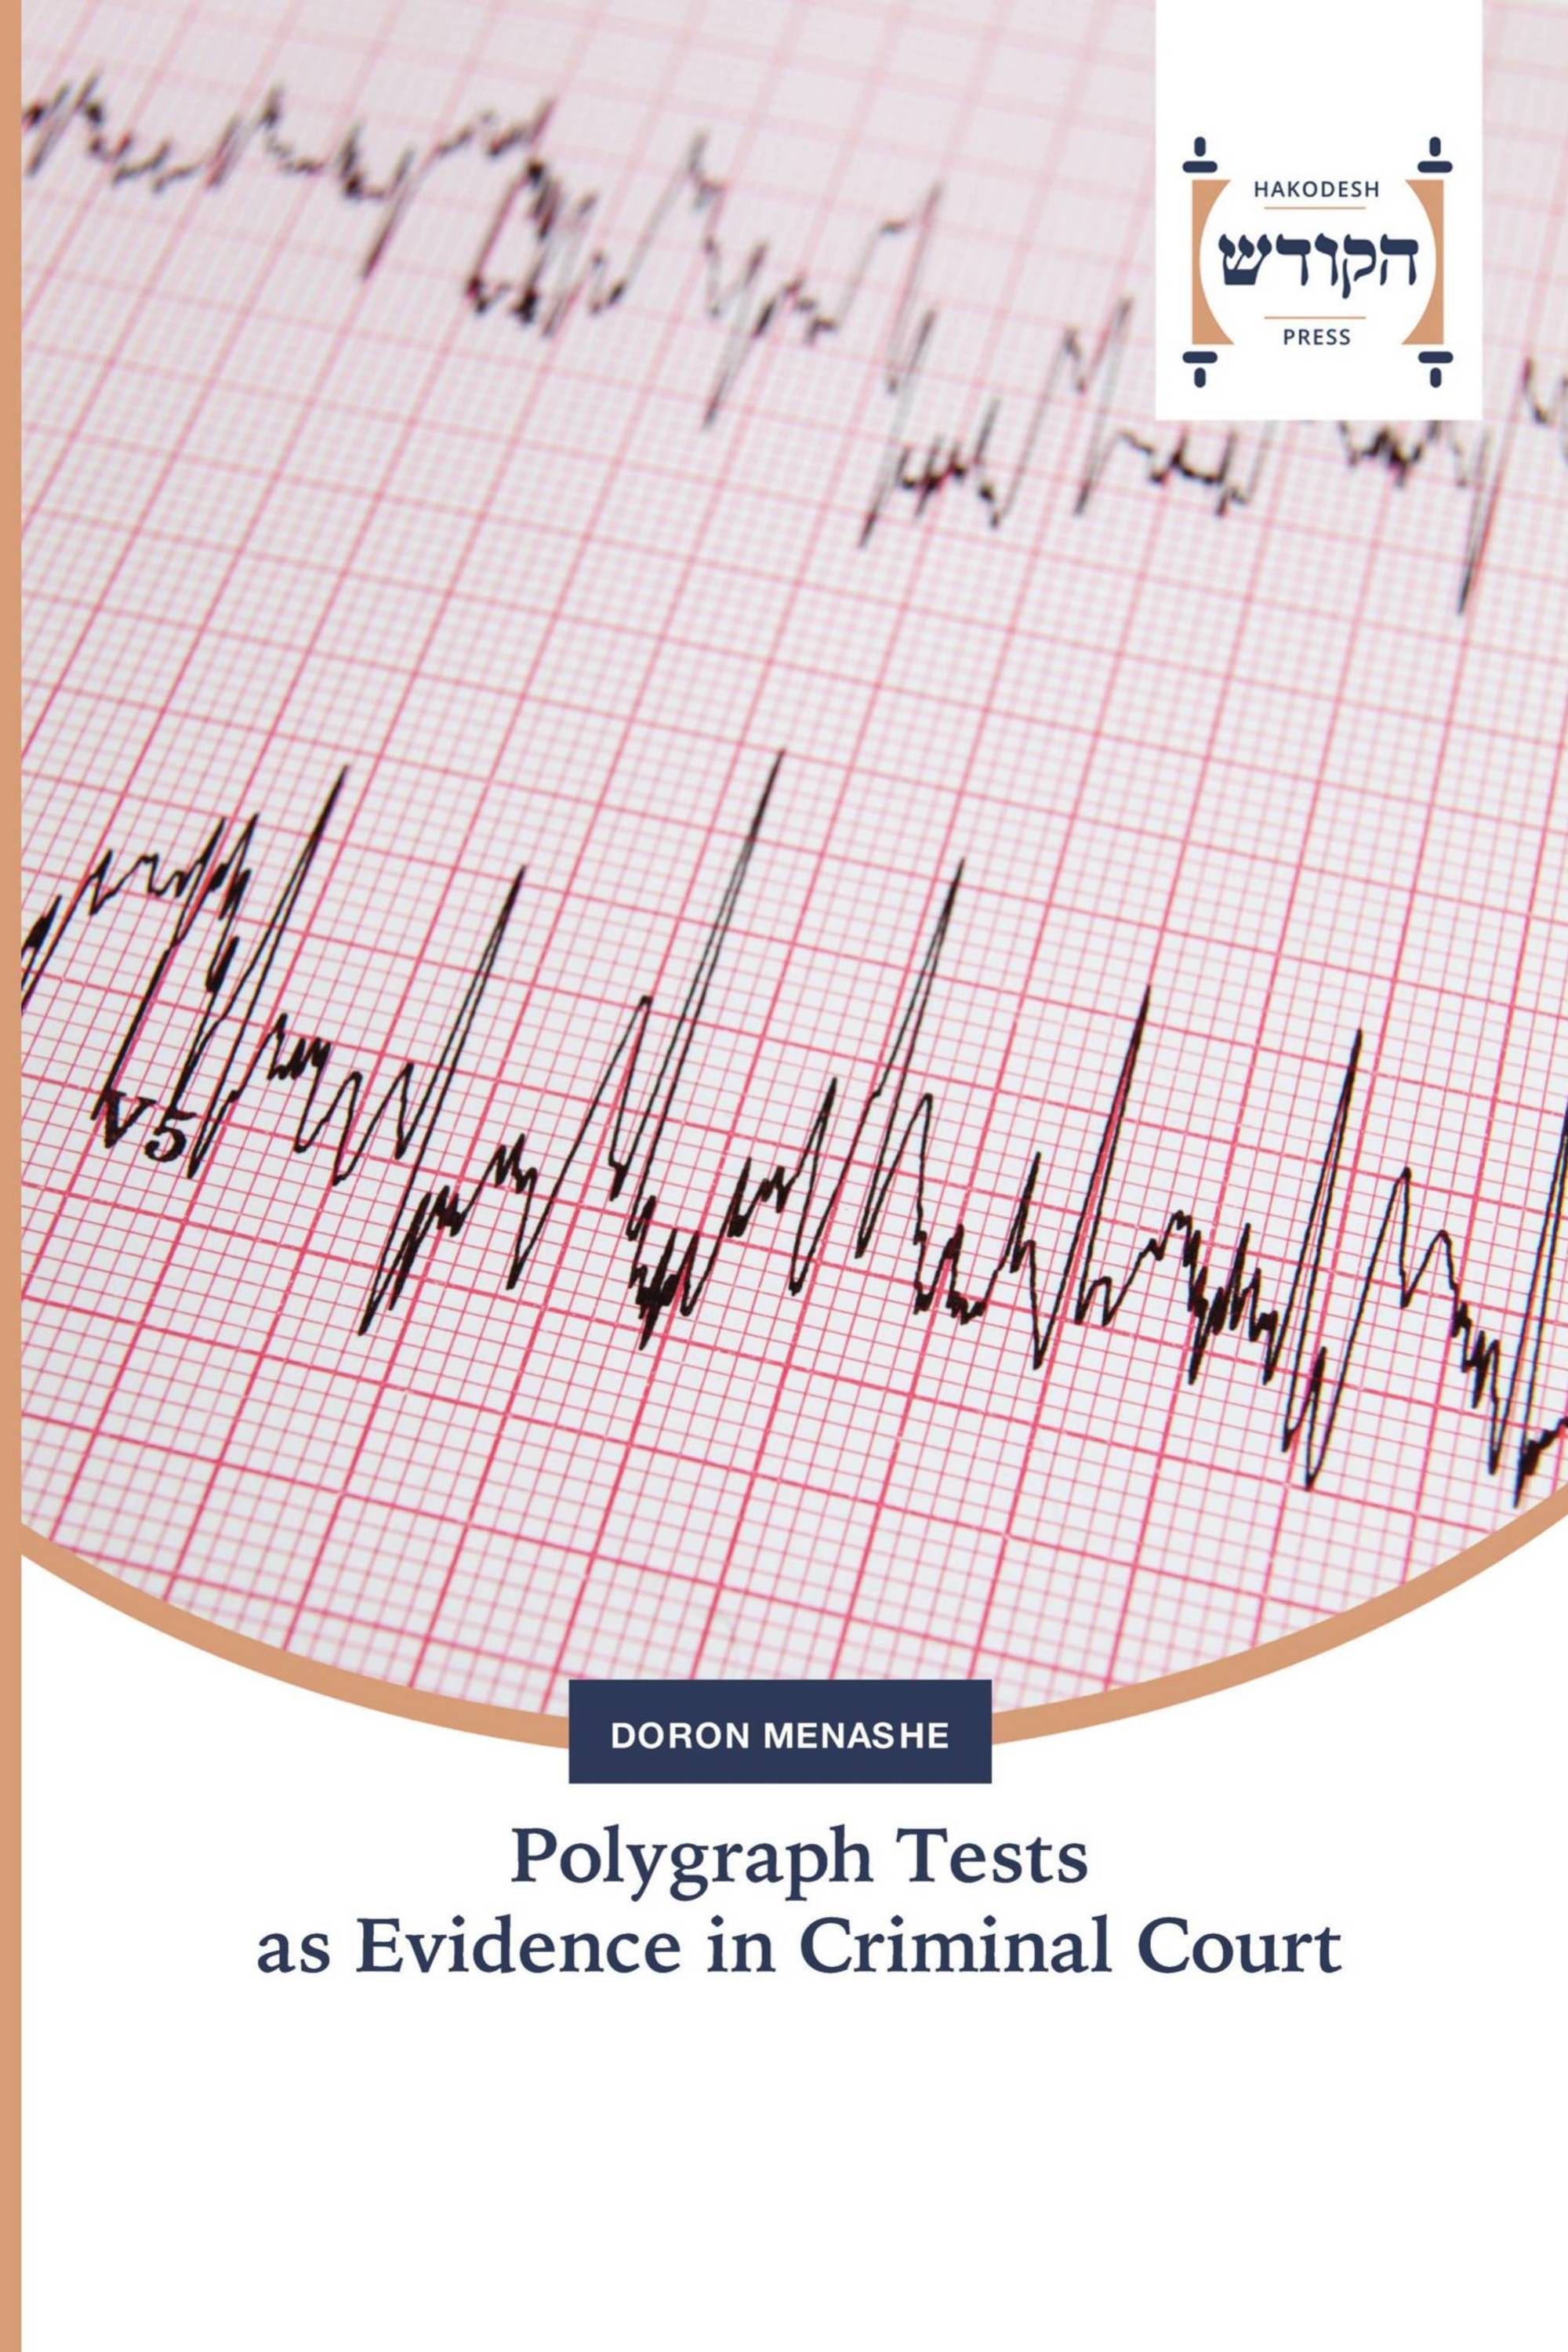 Polygraph Tests as Evidence in Criminal Court